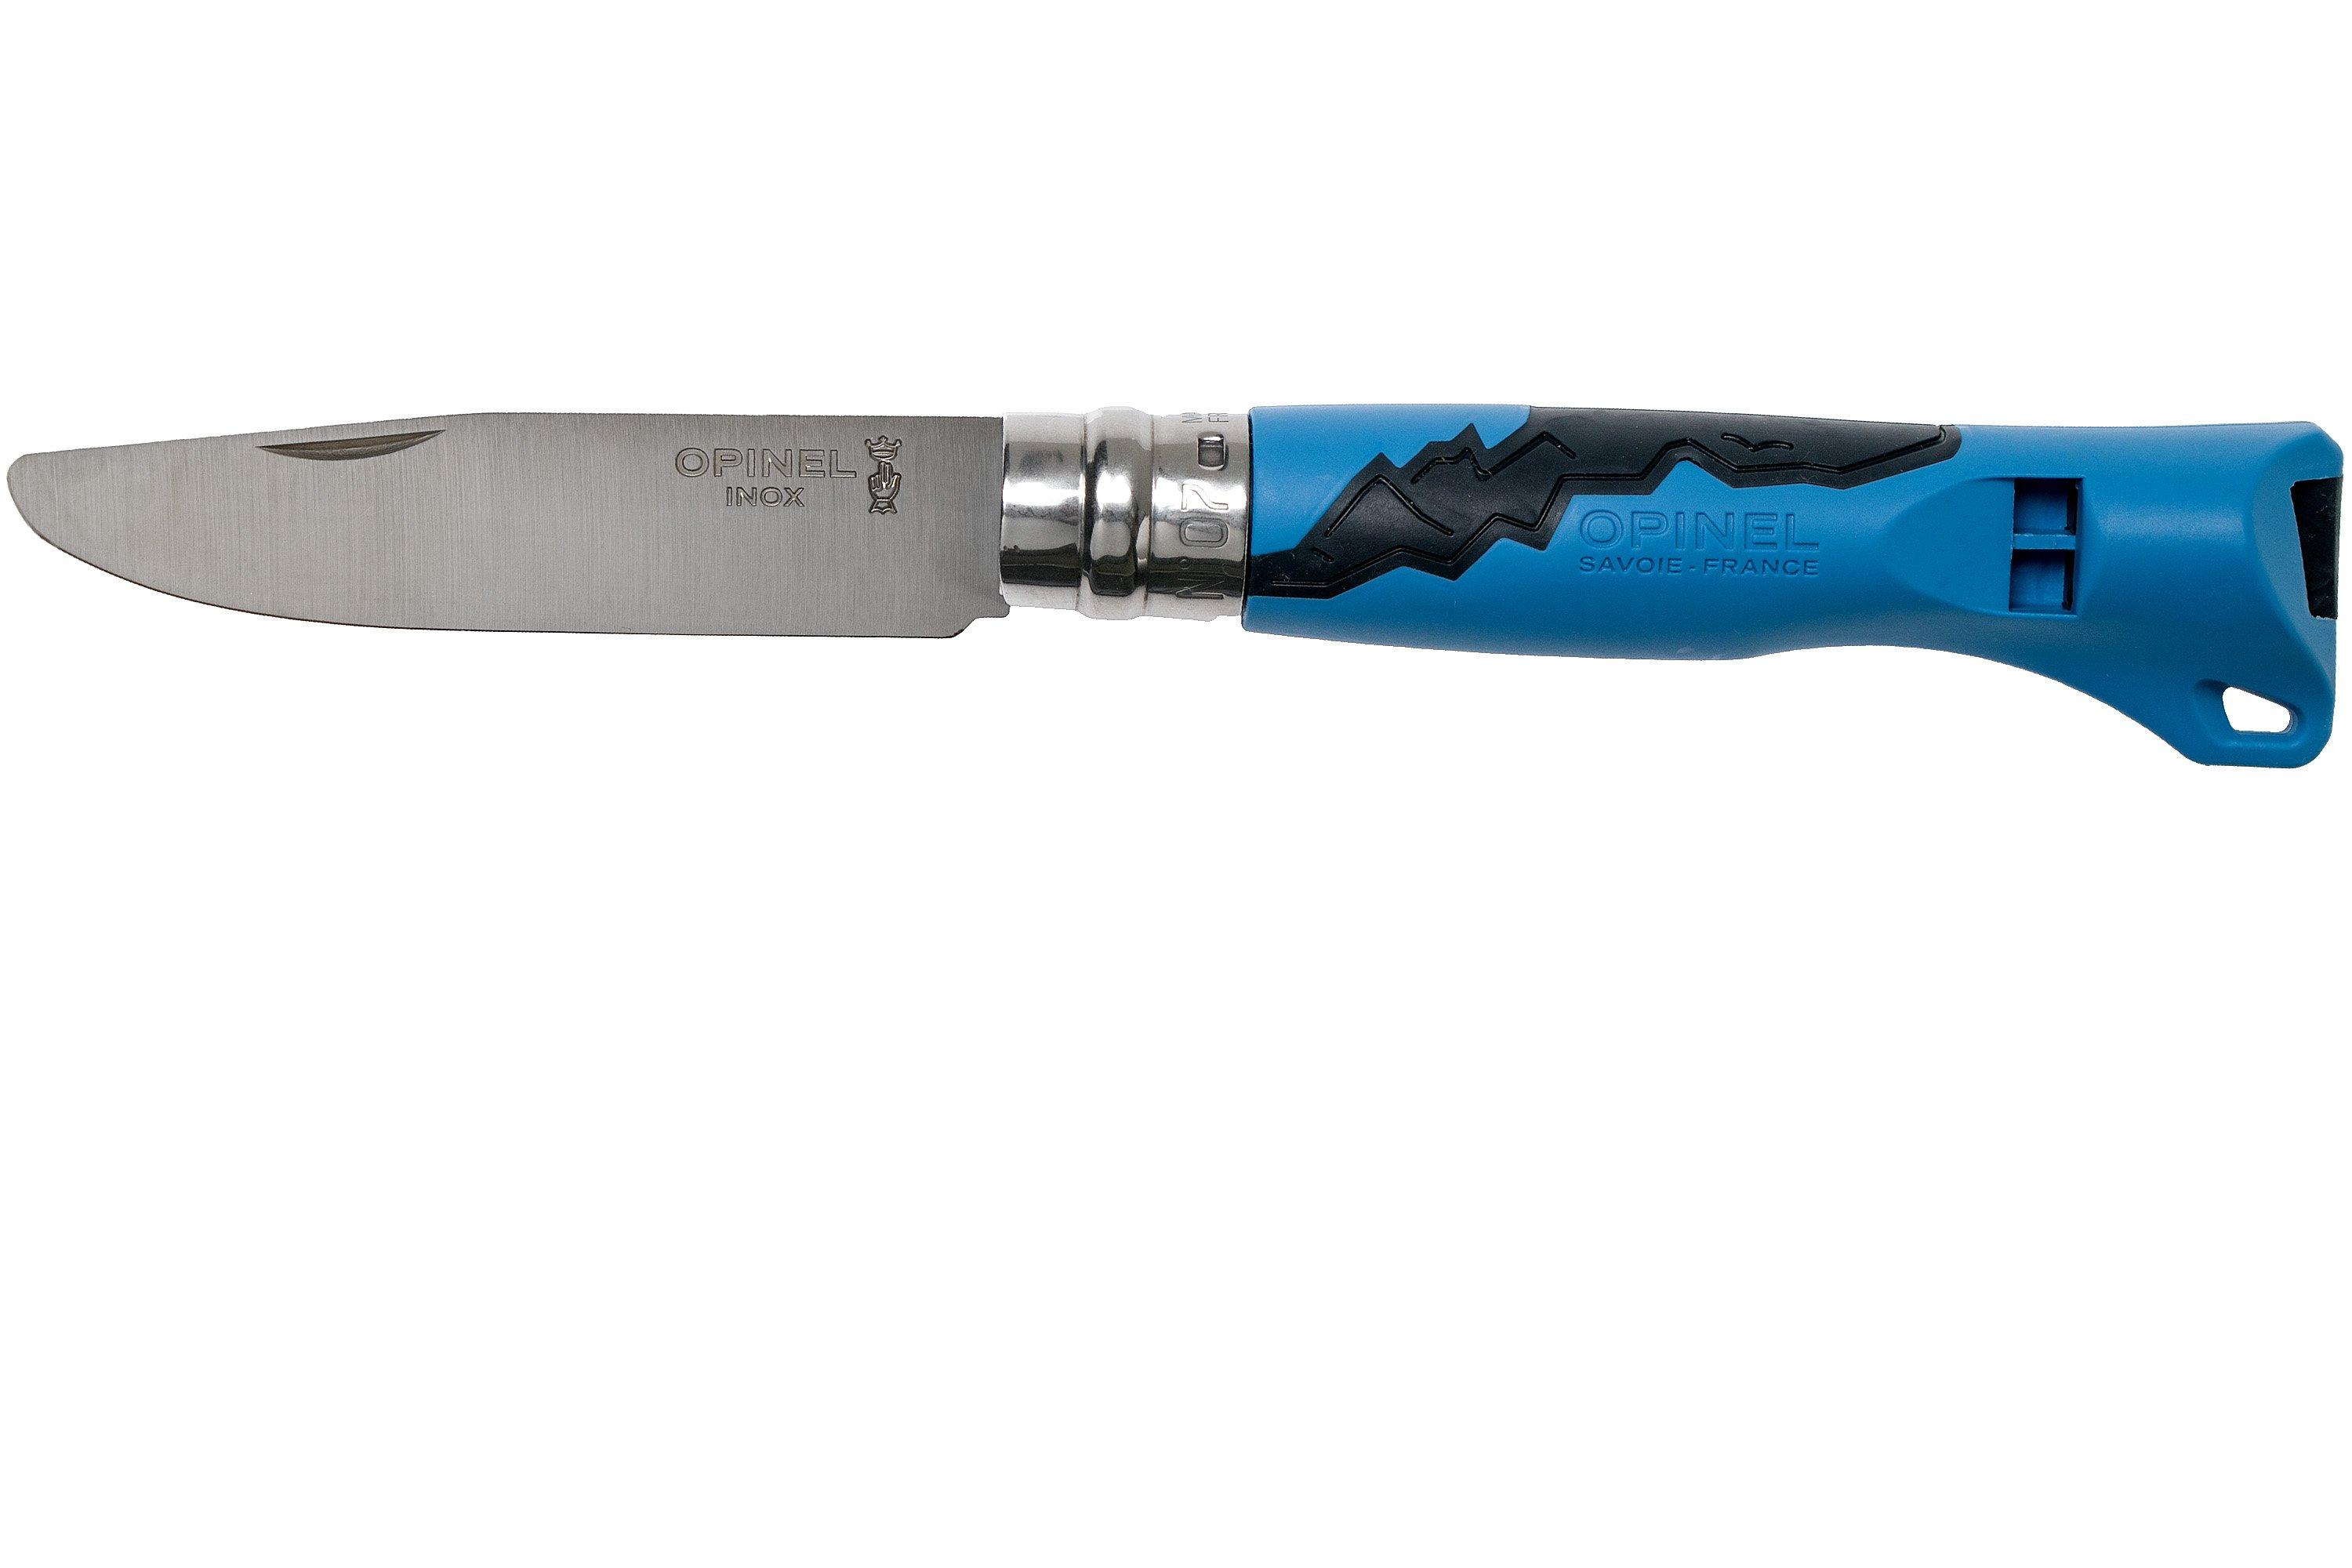  Opinel Outdoor Junior No. 07 Stainless Steel Folding Knife  with Safety Rounded Tip, Integrated Whistle, Made in France (Blue) : Sports  & Outdoors